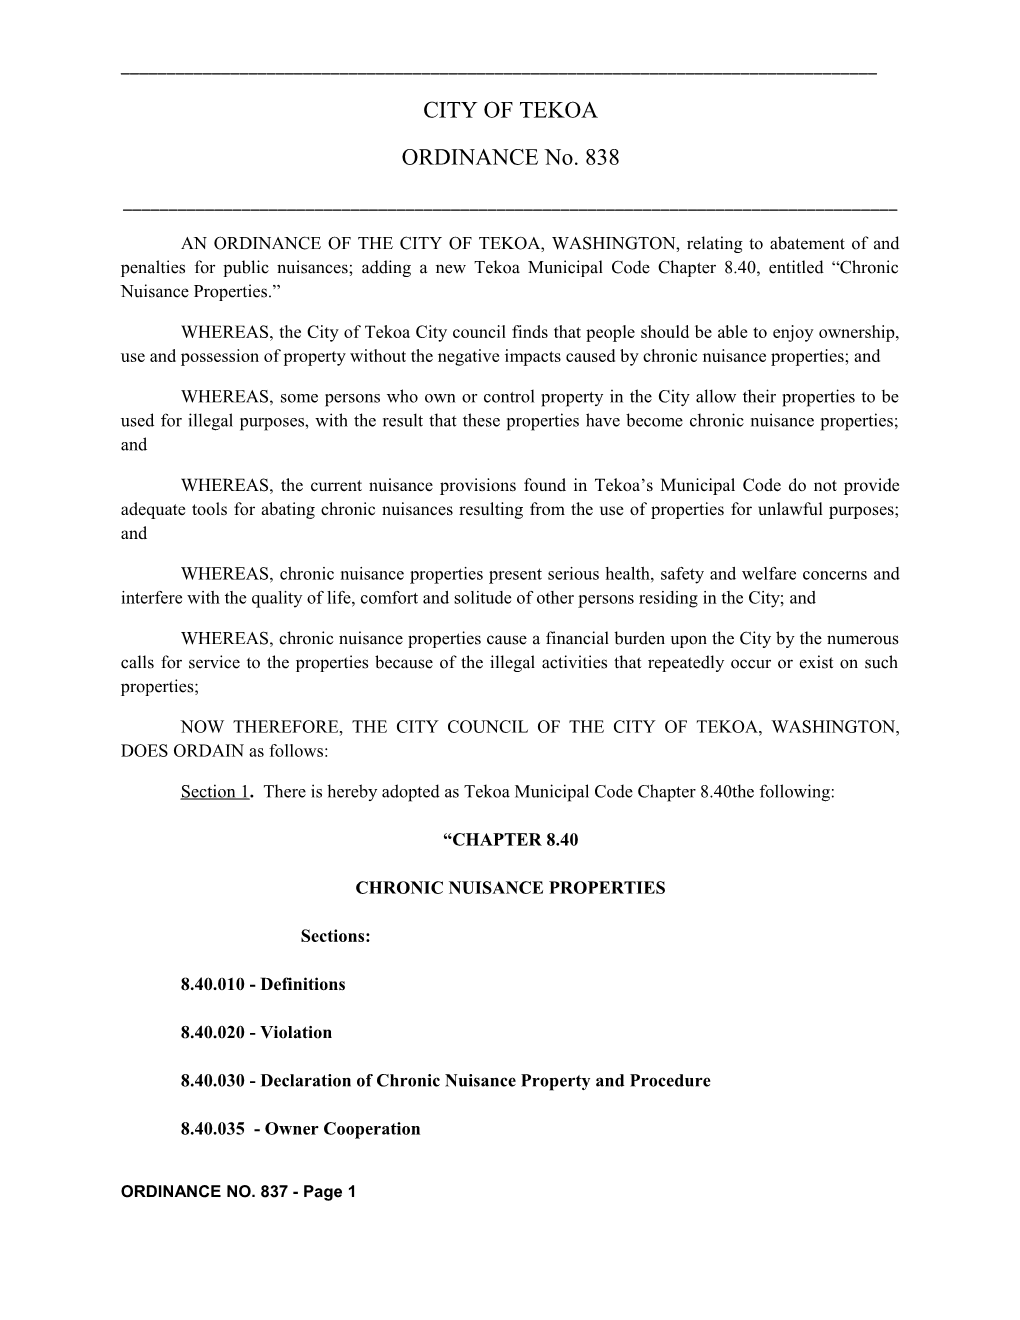 AN ORDINANCE of the CITY of TEKOA, WASHINGTON, Relating to Abatement of and Penalties For